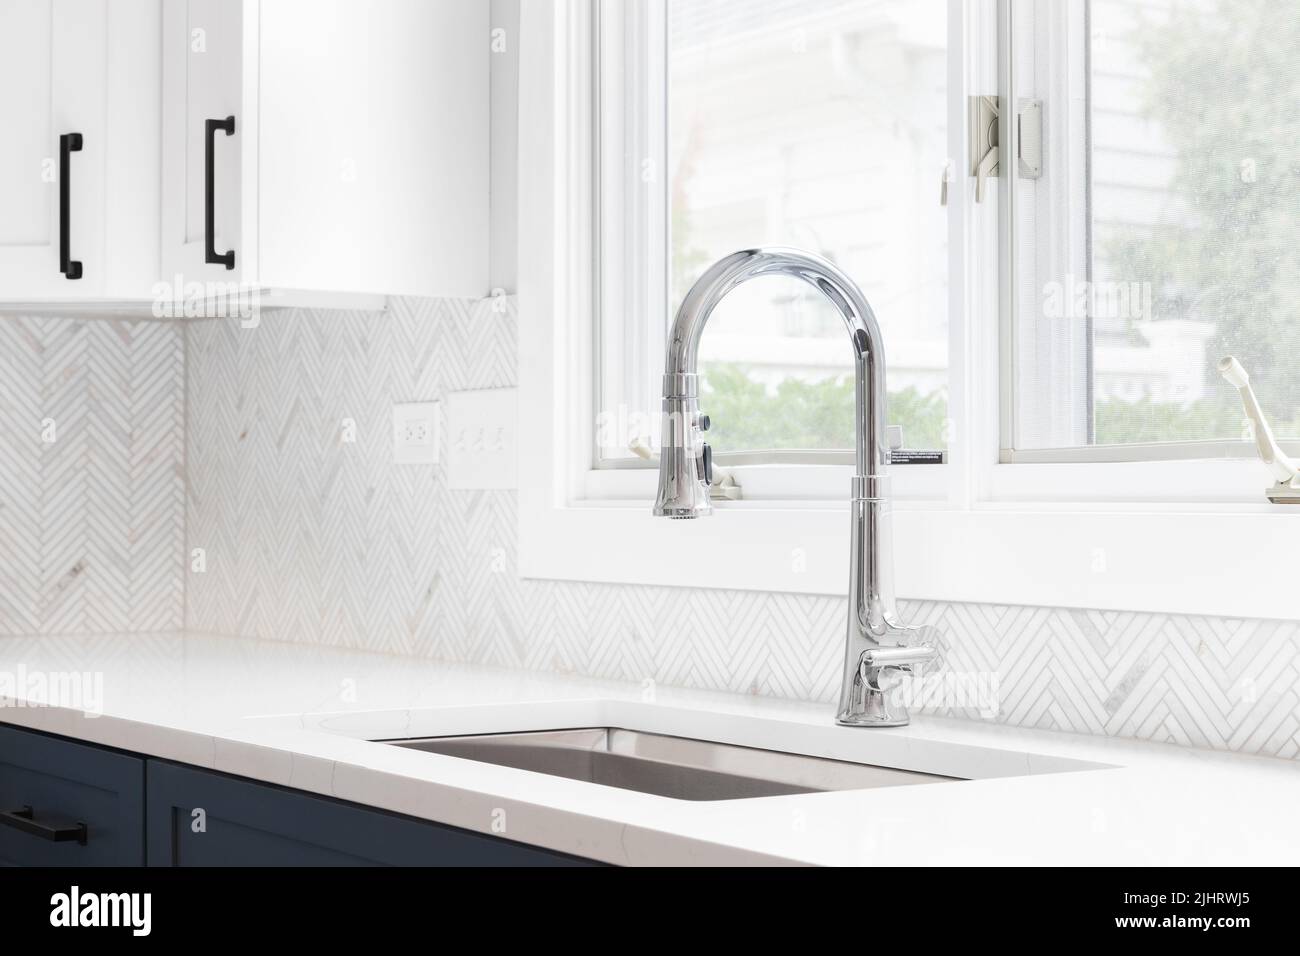 A kitchen sink detail shot with blue and white cabinets, herringbone tile backsplash, and a chrome faucet in front of a window. Stock Photo